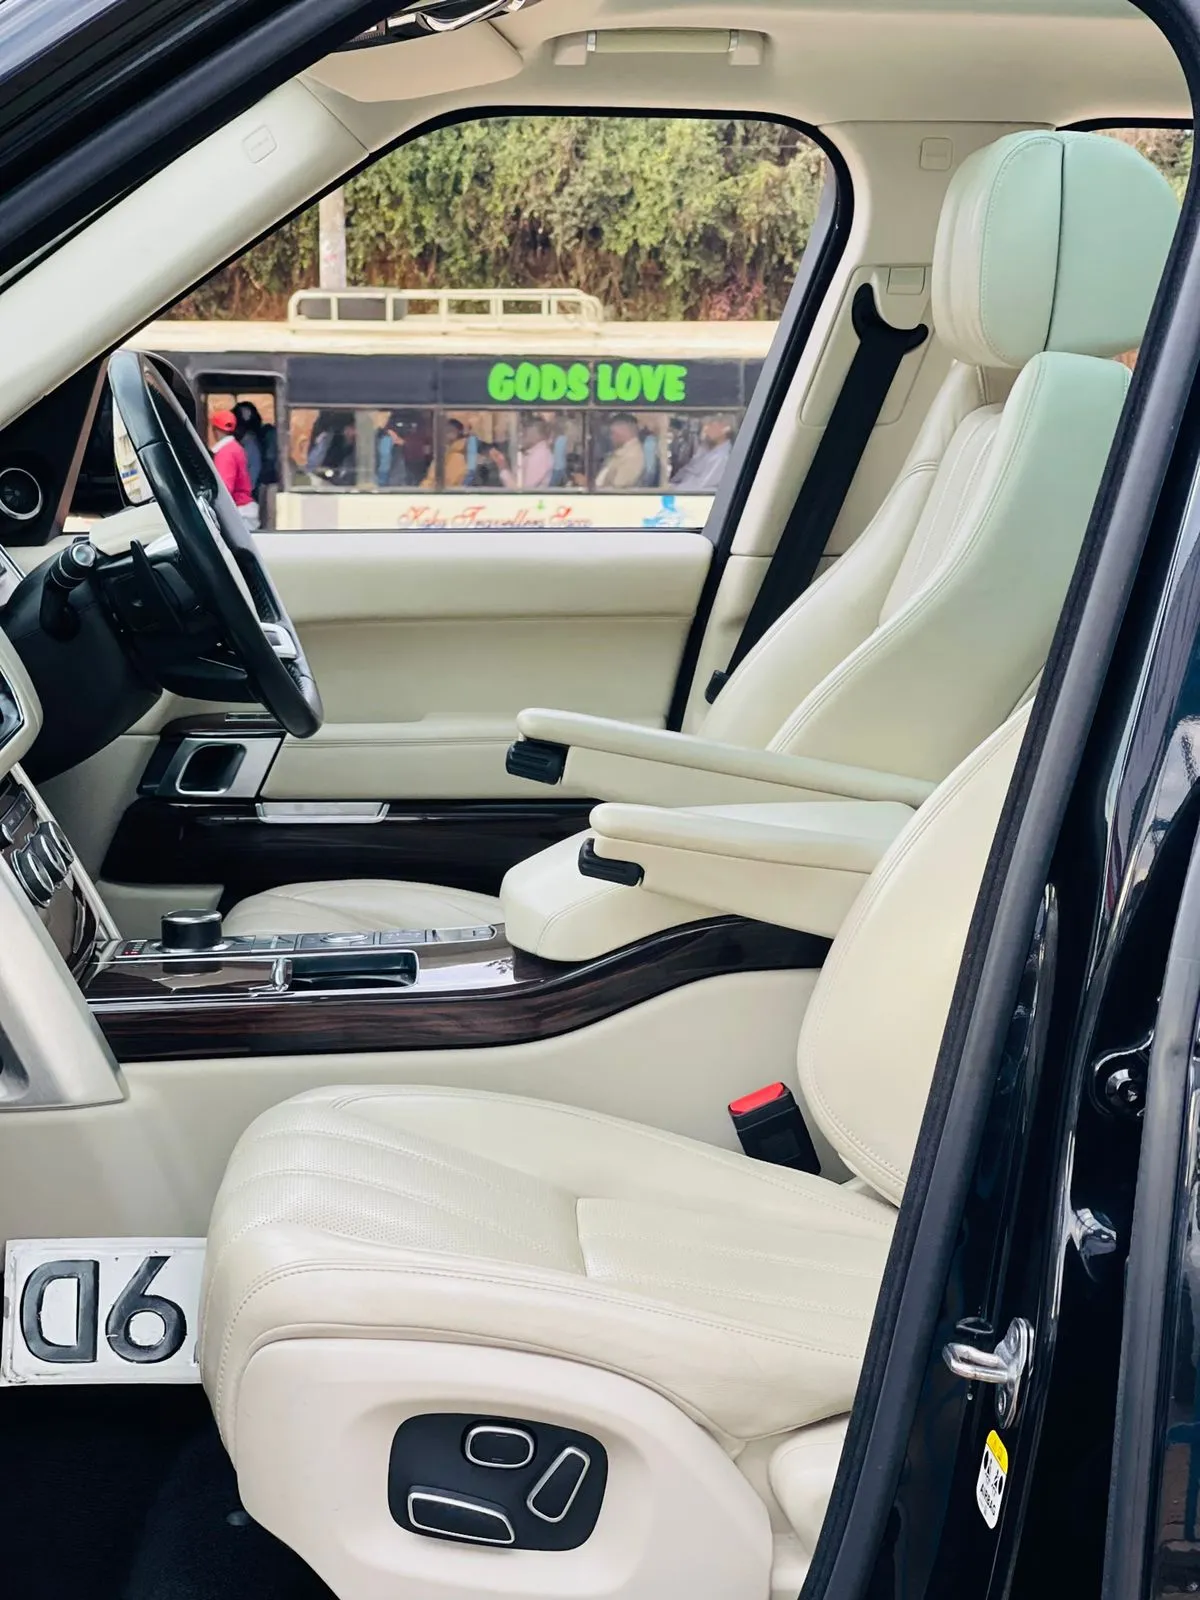 RANGE ROVER VOGUE SUNROOF 2015 EXCLUSIVE CHEAPEST QUICK SALE